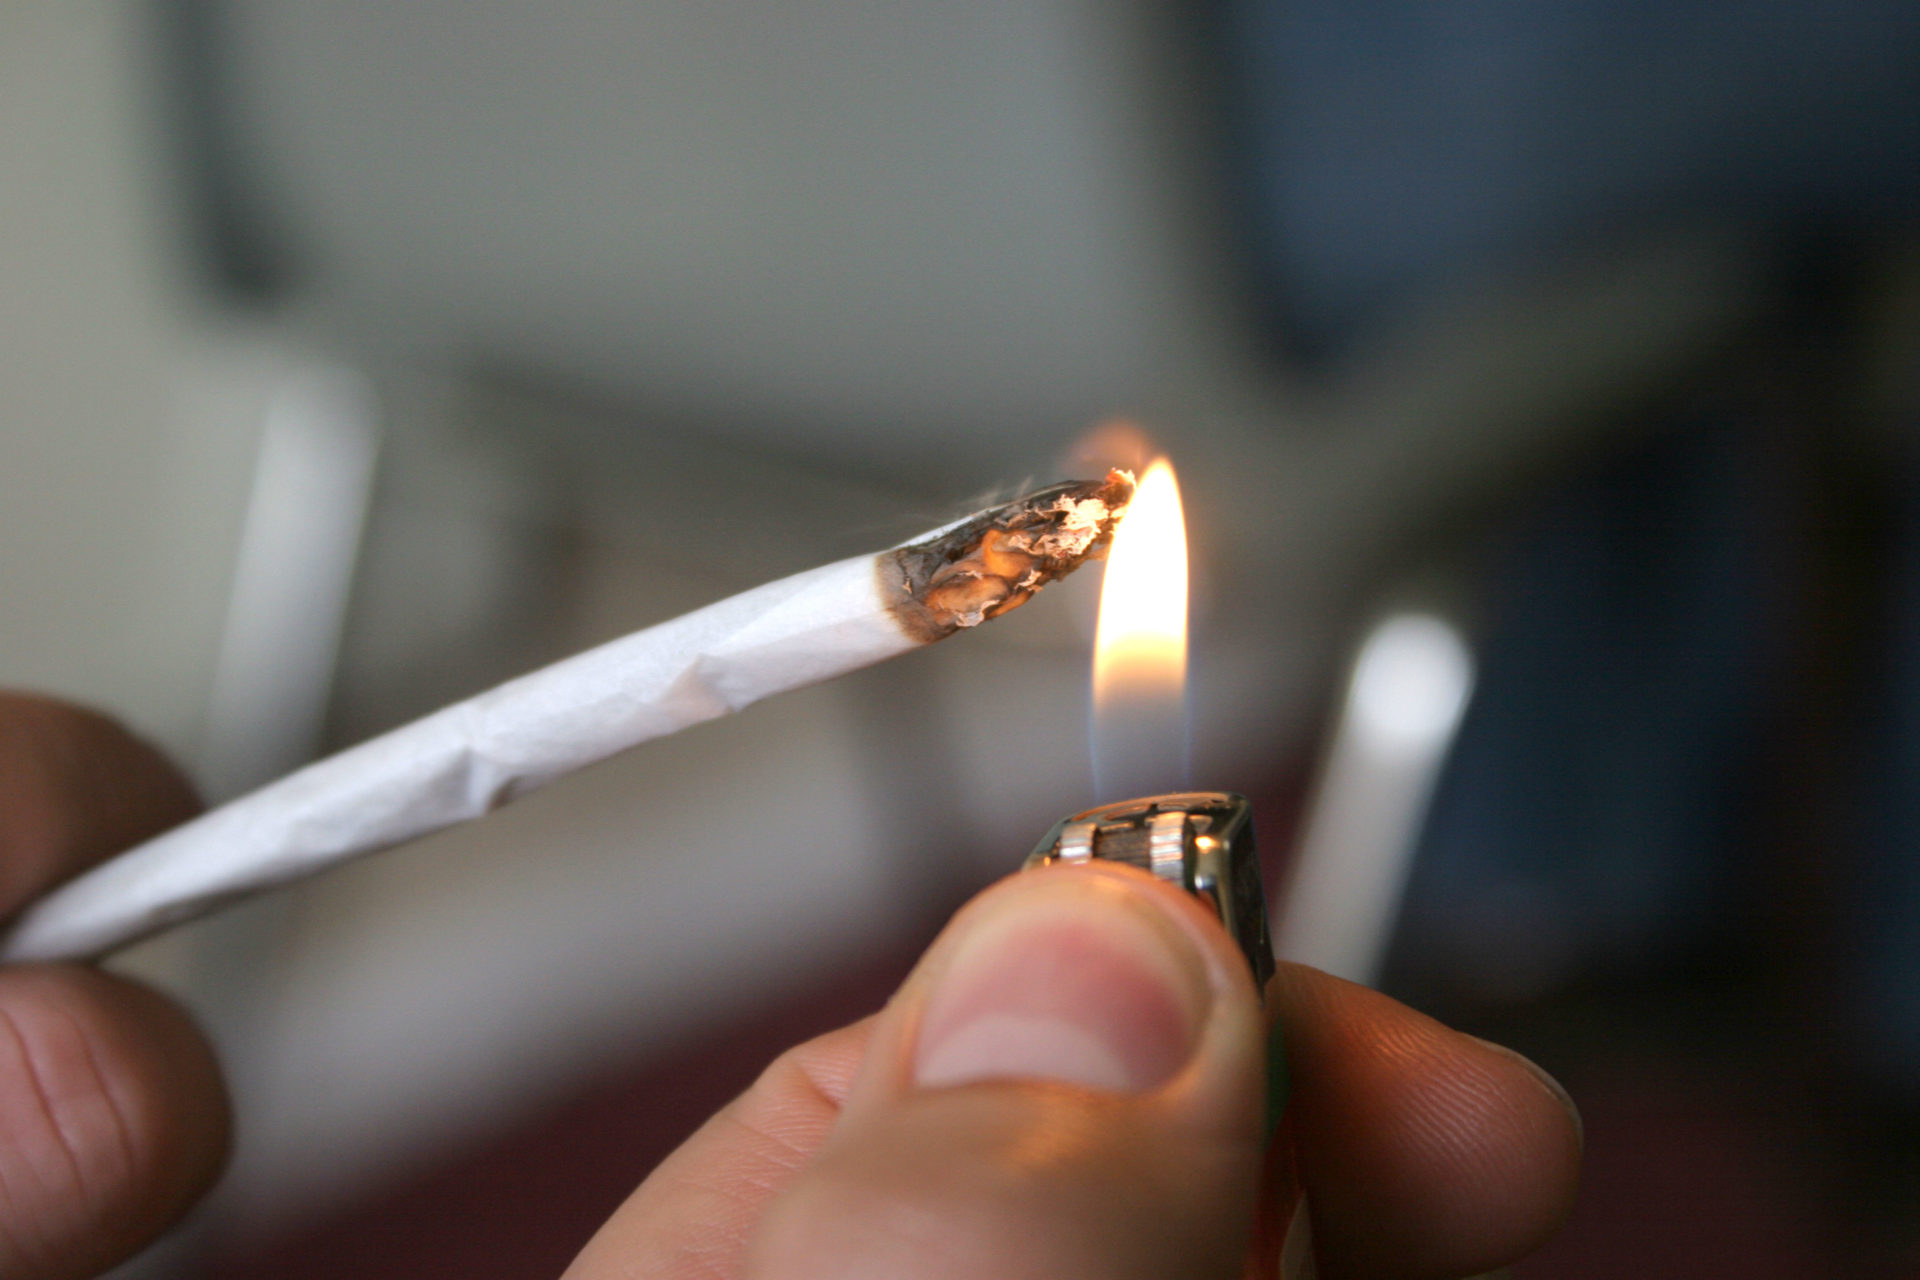 A cannabis cigarette being smoked, 30-4-08